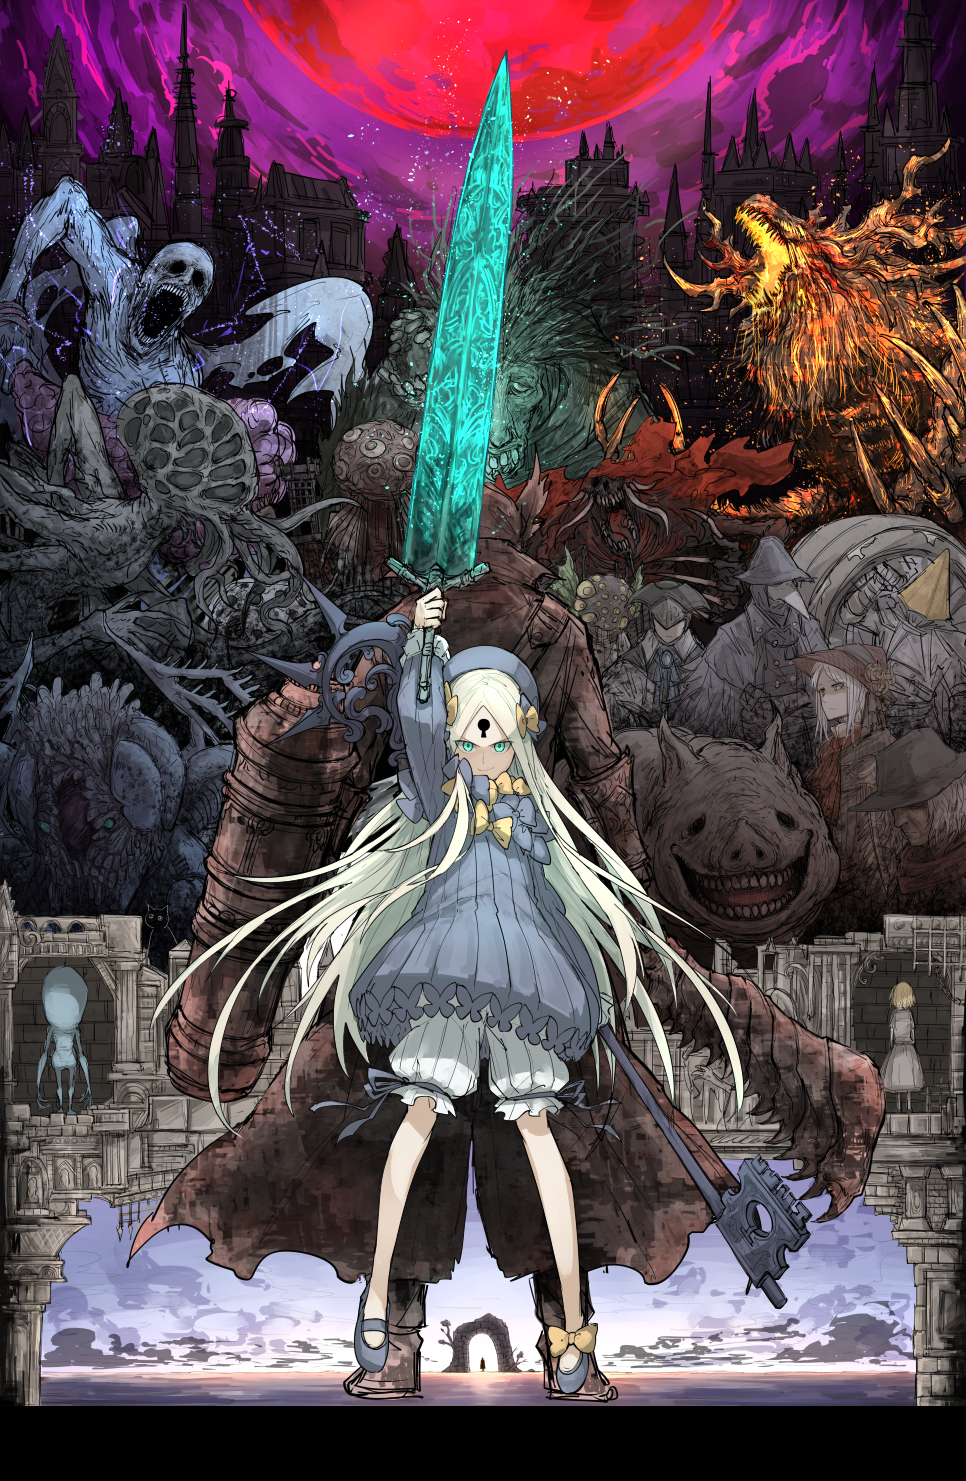 abigail_williams_(fate/grand_order) amygdala arm_up back-to-back blood-starved_beast bloodborne bow cannon city crossover ebrietas_daughter_of_the_cosmos eileen_the_crow fate/grand_order fate_(series) gehrman_the_first_hunter glowing glowing_weapon greatsword hair_bow hat highres holding holding_weapon holy_moonlight_sword hunter_(bloodborne) kan_(aaaaari35) key laurence_the_first_vicar looking_at_viewer ludwig_the_accursed moon night night_sky orphan_of_kos plain_doll red_moon saw_cleaver sky smile the_old_hunters tricorne weapon